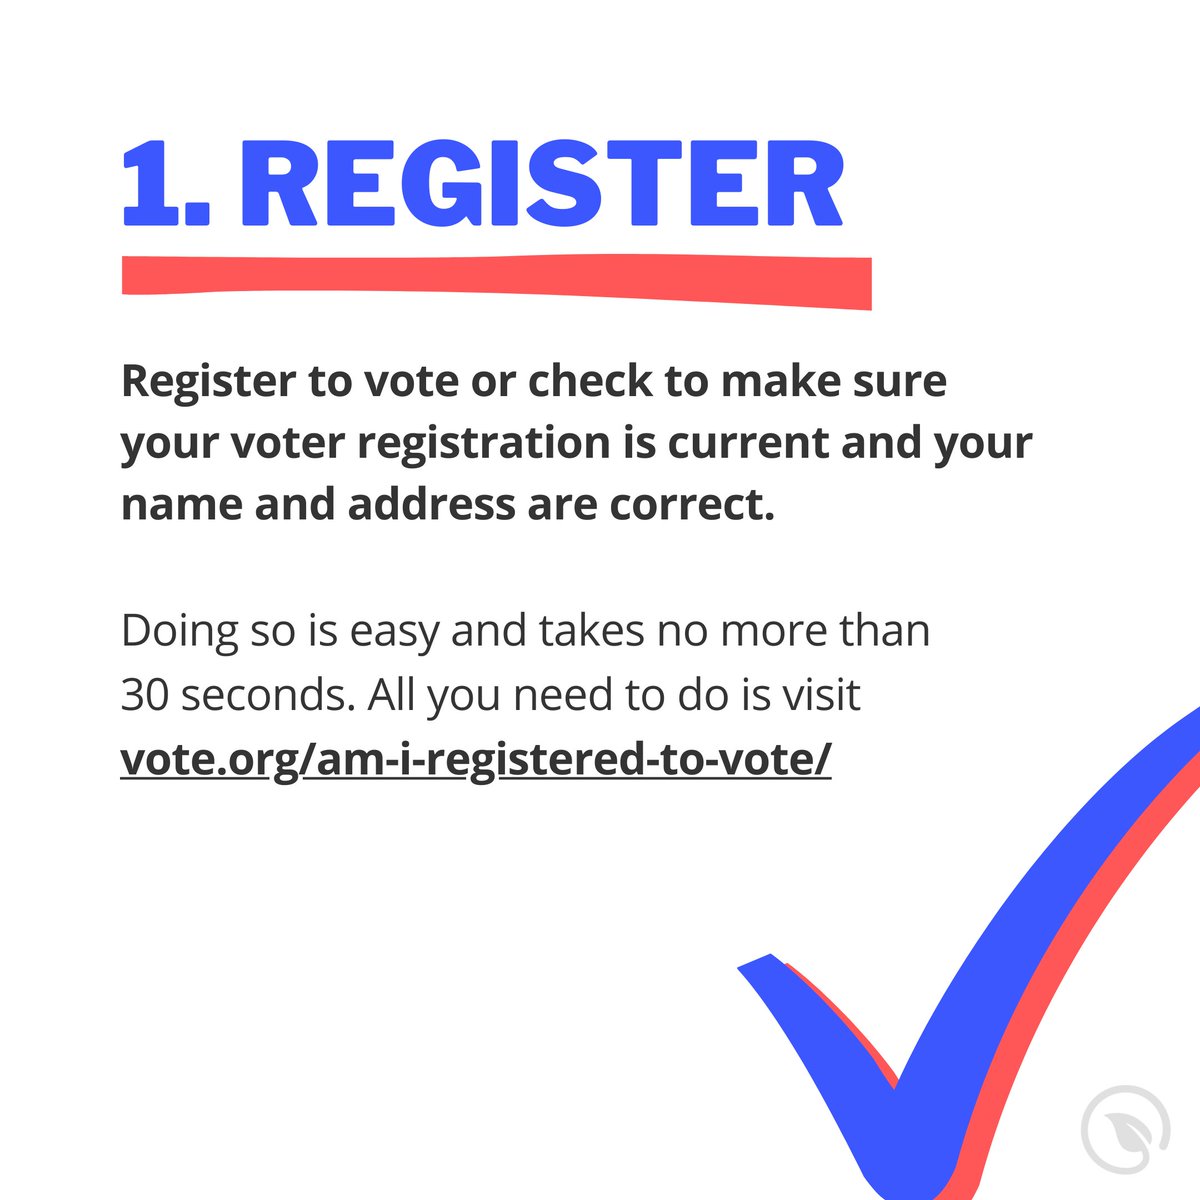 We're 52 days away from the General Election. Start by registering to  #vote   (or checking to make sure your registration is current and your address is correct) at  https://www.vote.org/am-i-registered-to-vote/Then take two minutes to request your mail-in/absentee ballot at  http://vote.org/absentee-ballot/